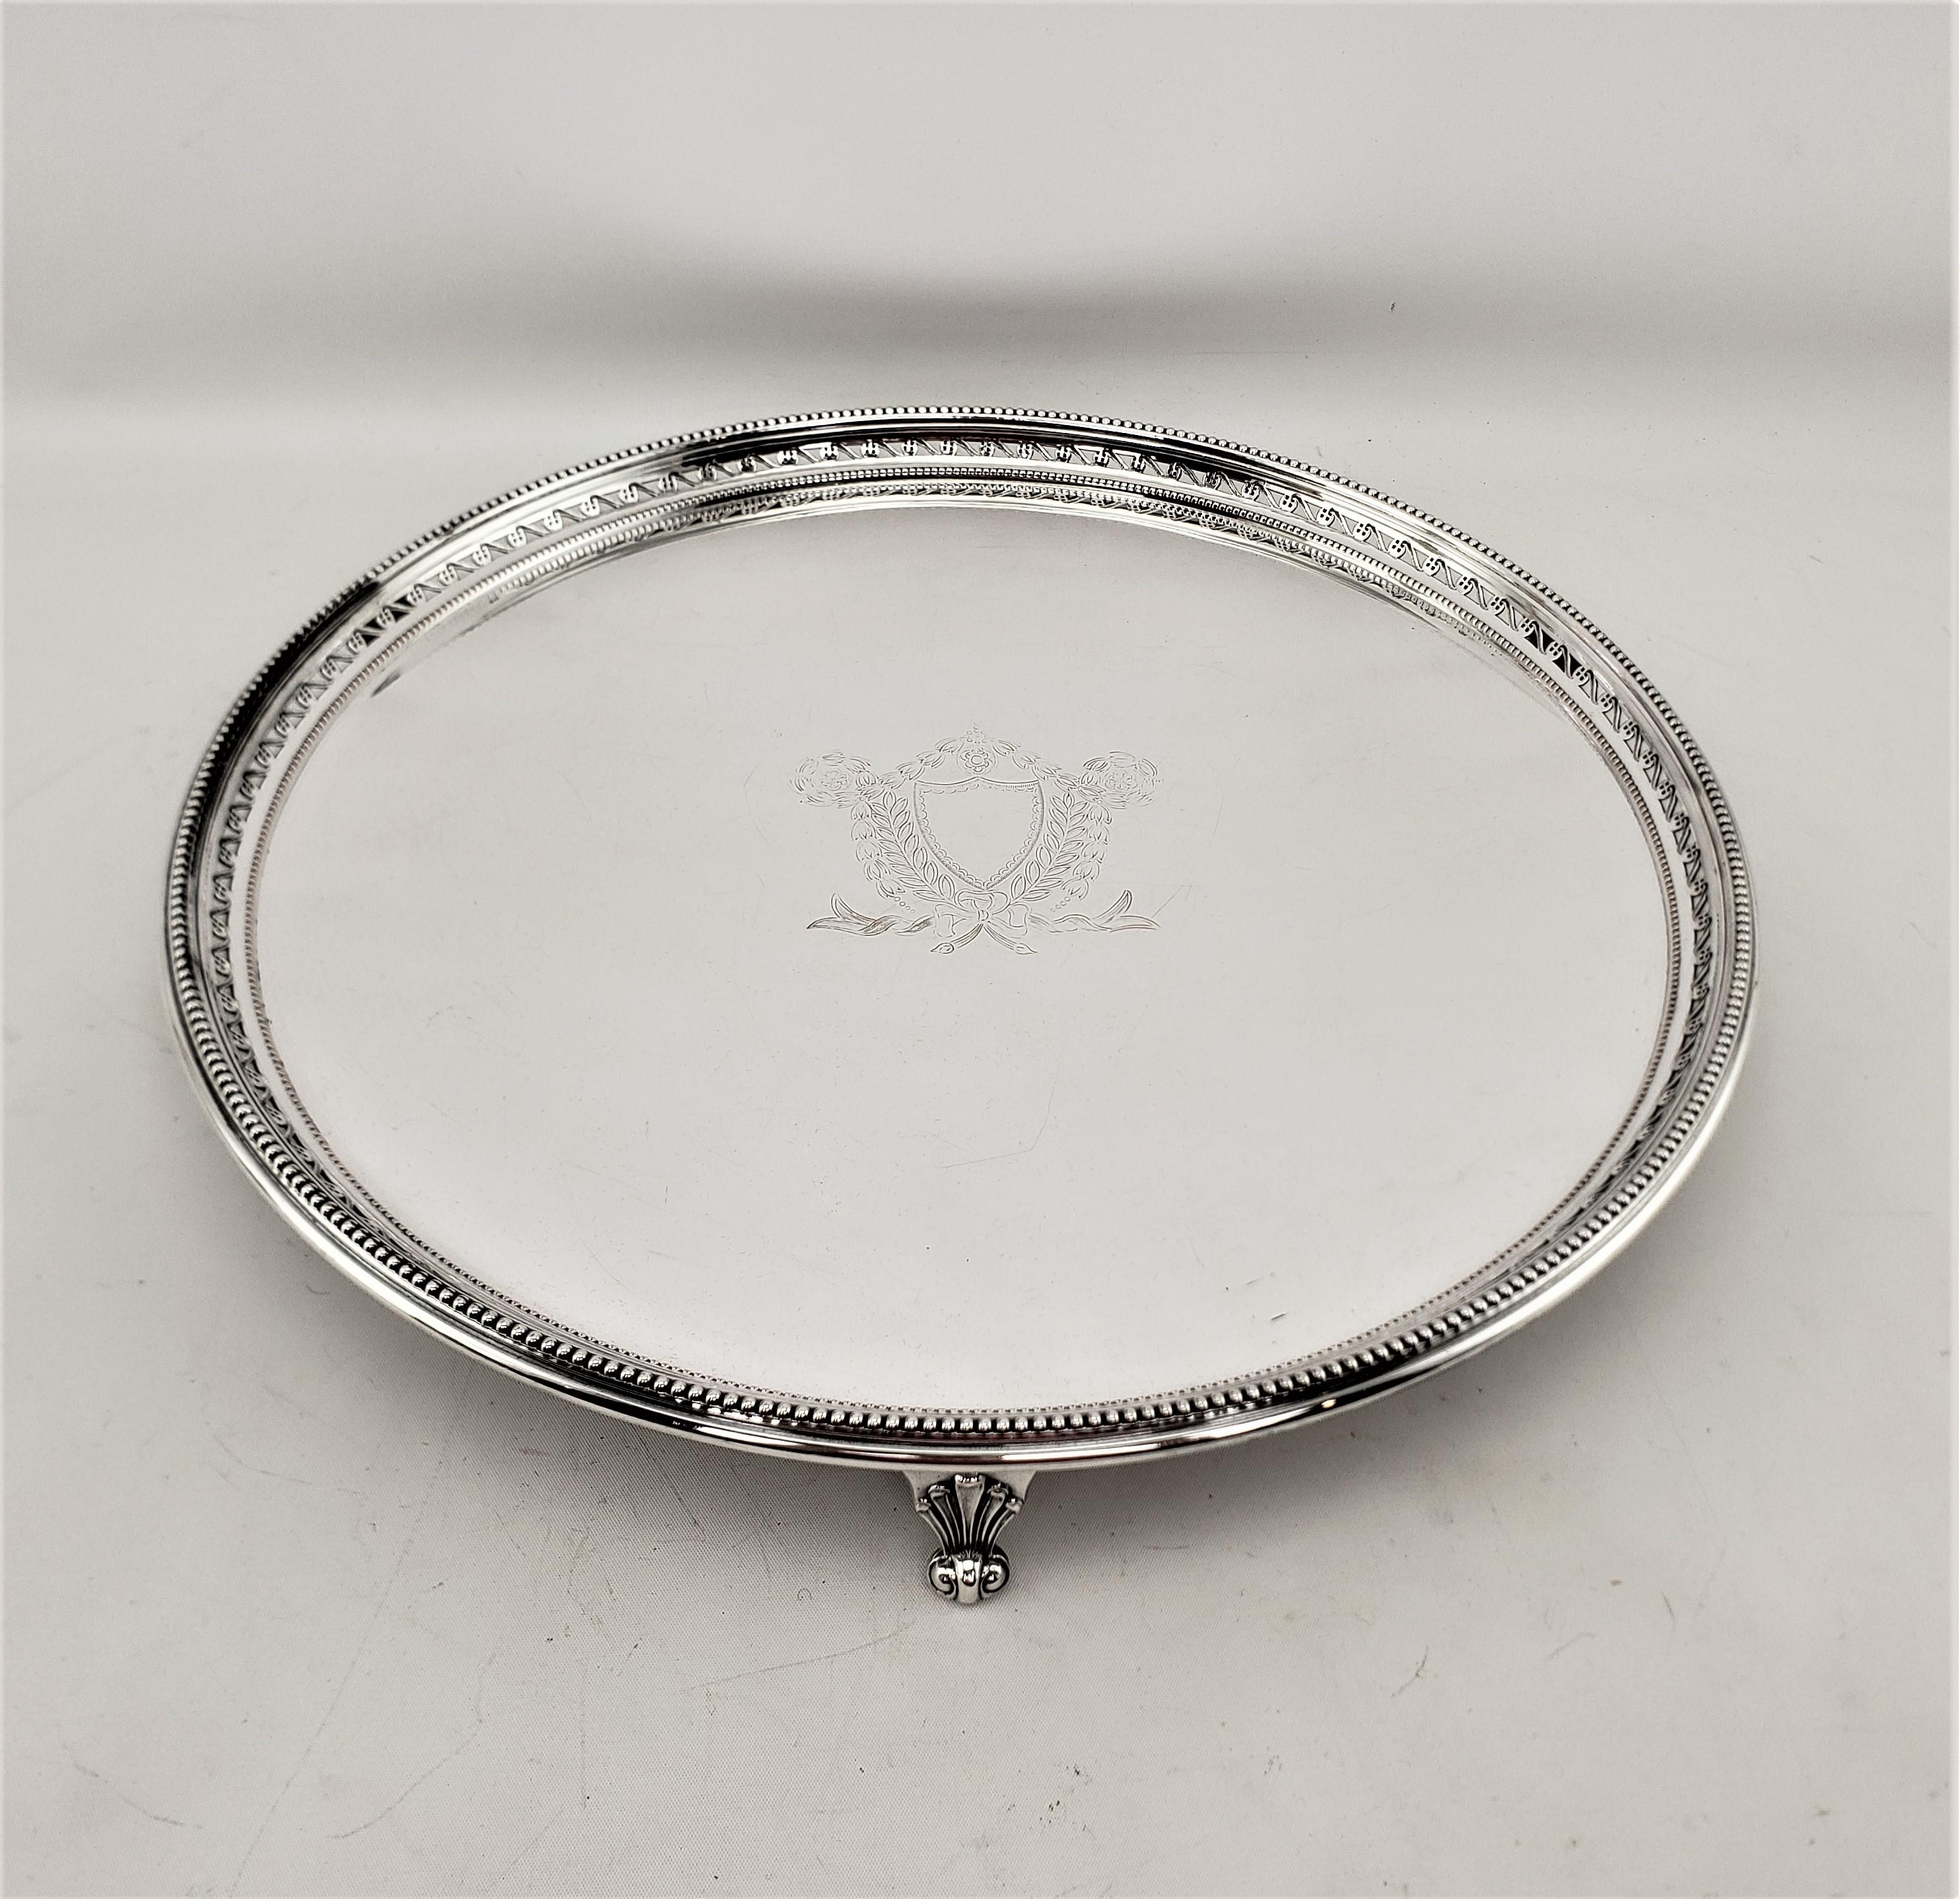 This round silver plated serving tray or salva was made by the renowned Barker Ellis Silver Company of England in approximately 1920 and done in the period Art Deco style. The tray has an engraved shield in the middle, surrounded by stylized leaves